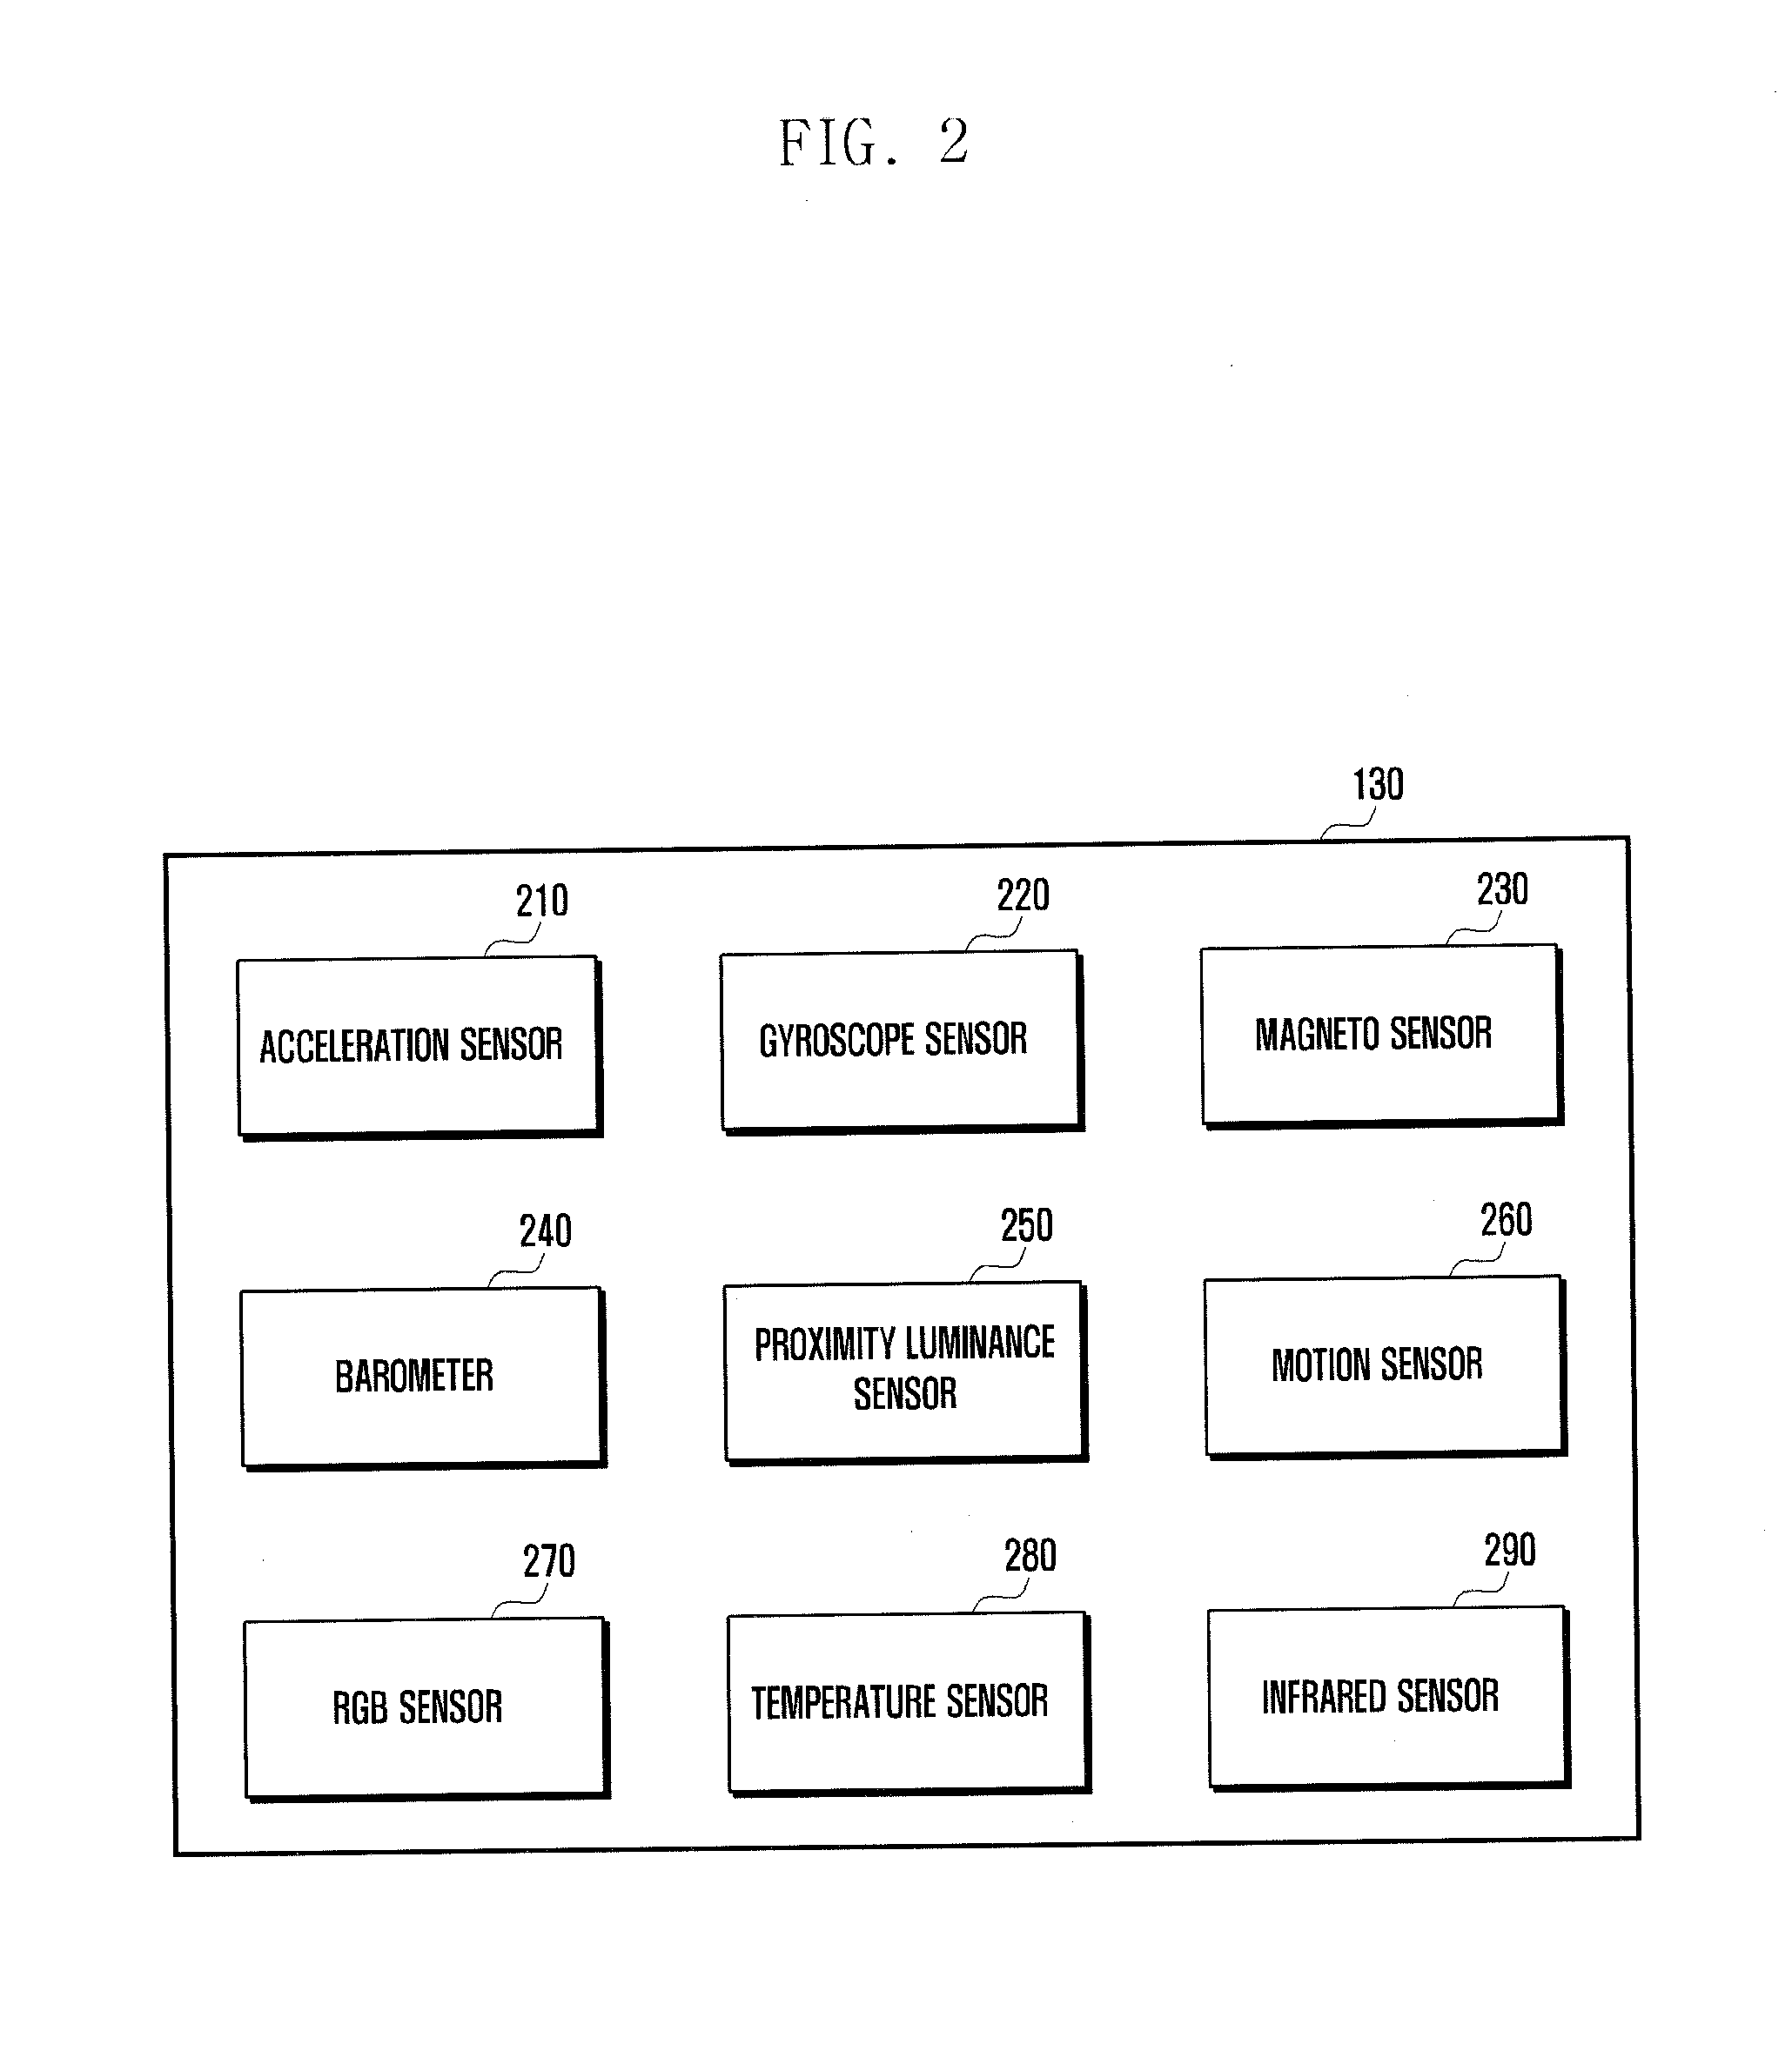 Mobile device with sensor hub and method for controlling the device